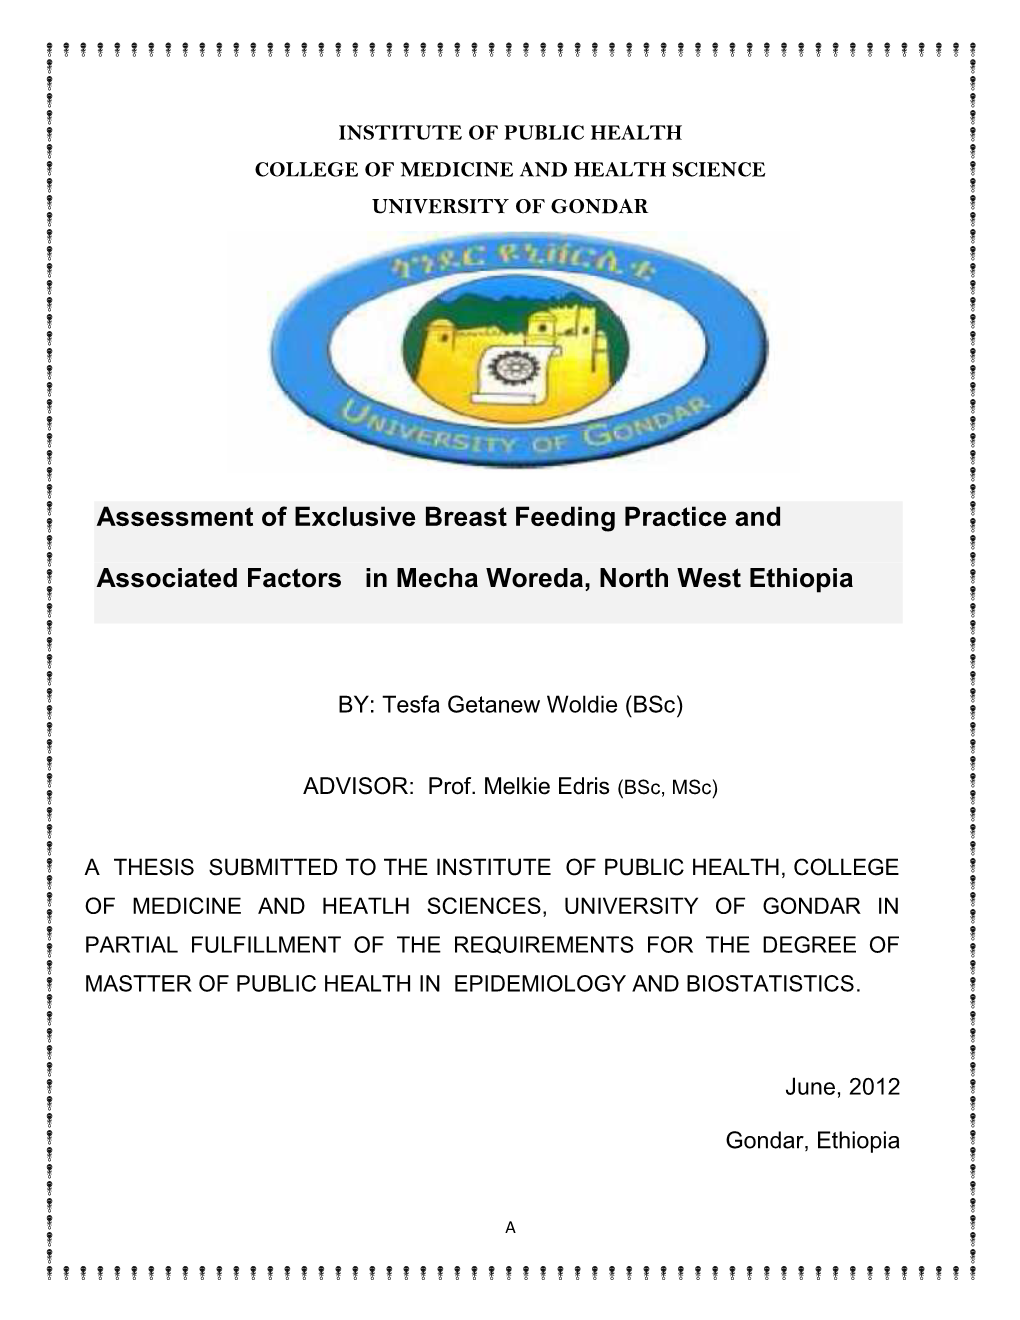 Assessment of Exclusive Breast Feeding Practice and Associated